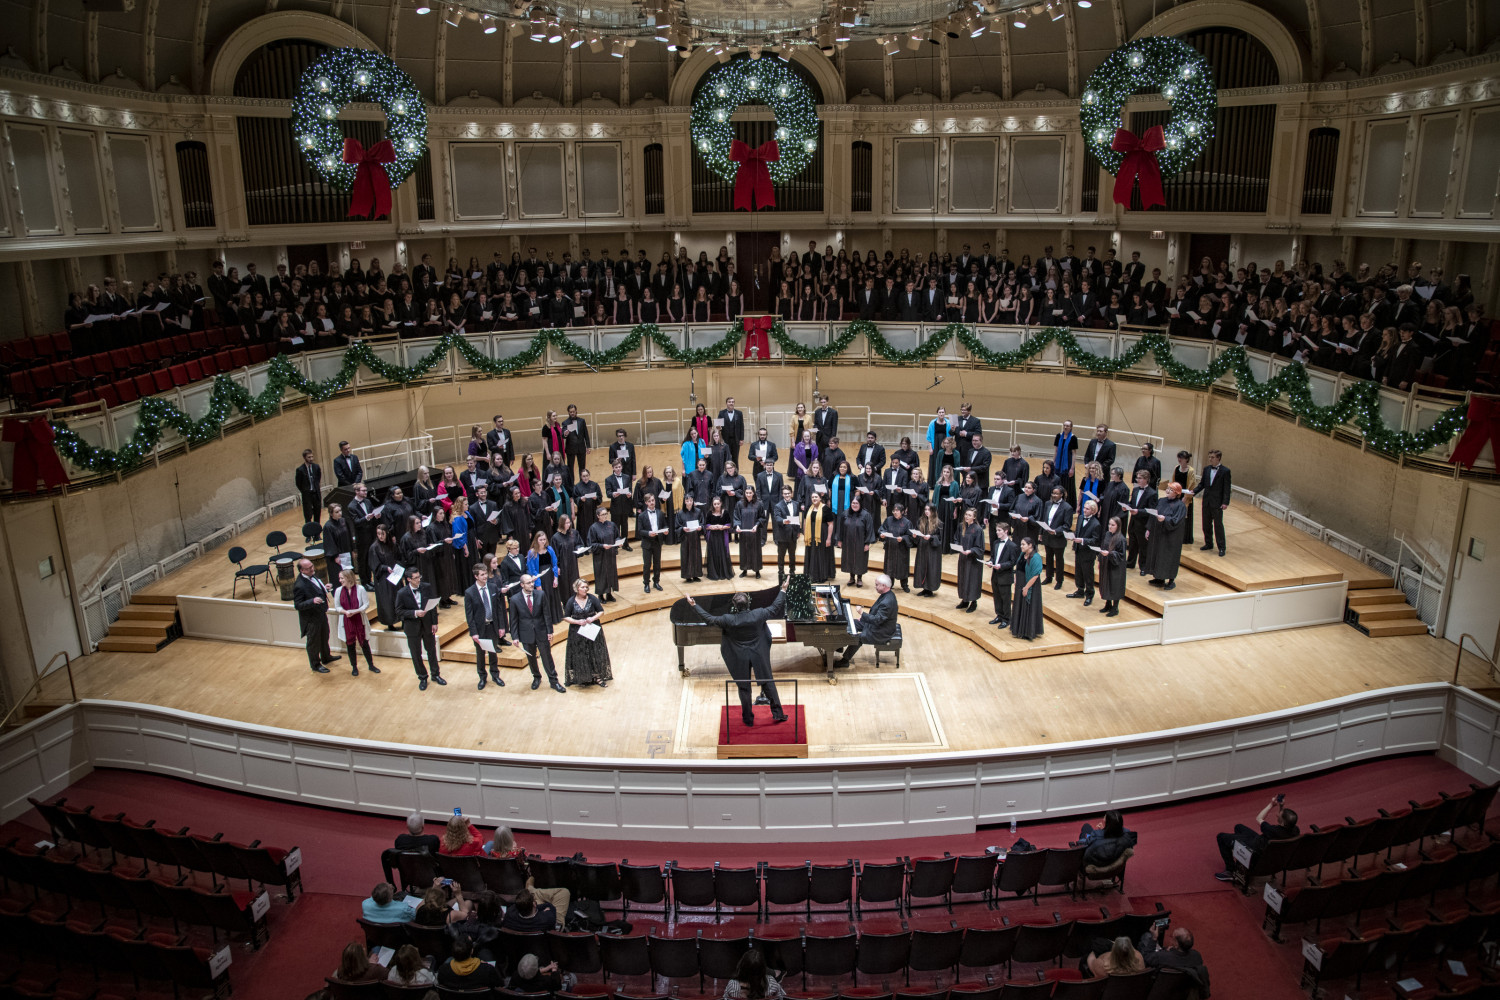 The Carthage Choir performs in the Chicago Symphony Hall.